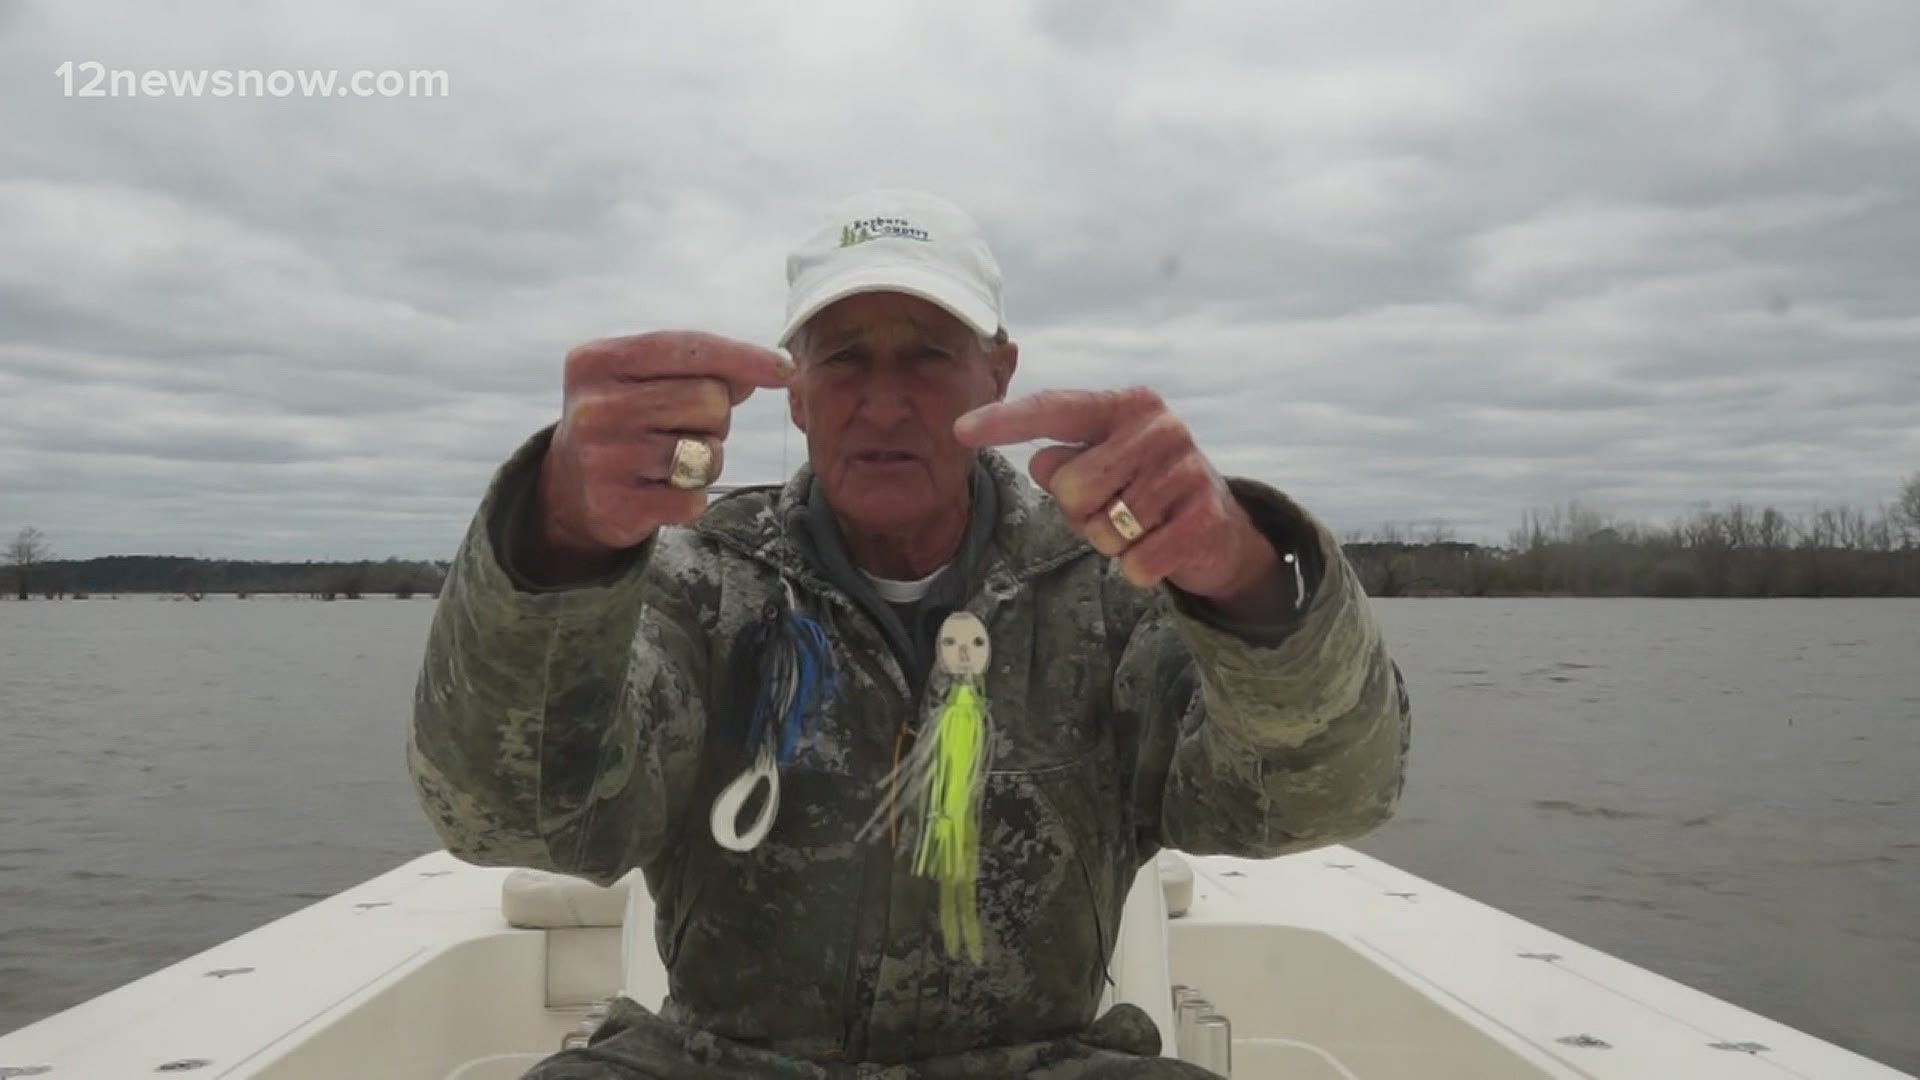 With spring fishing here, it's time to change up your bait